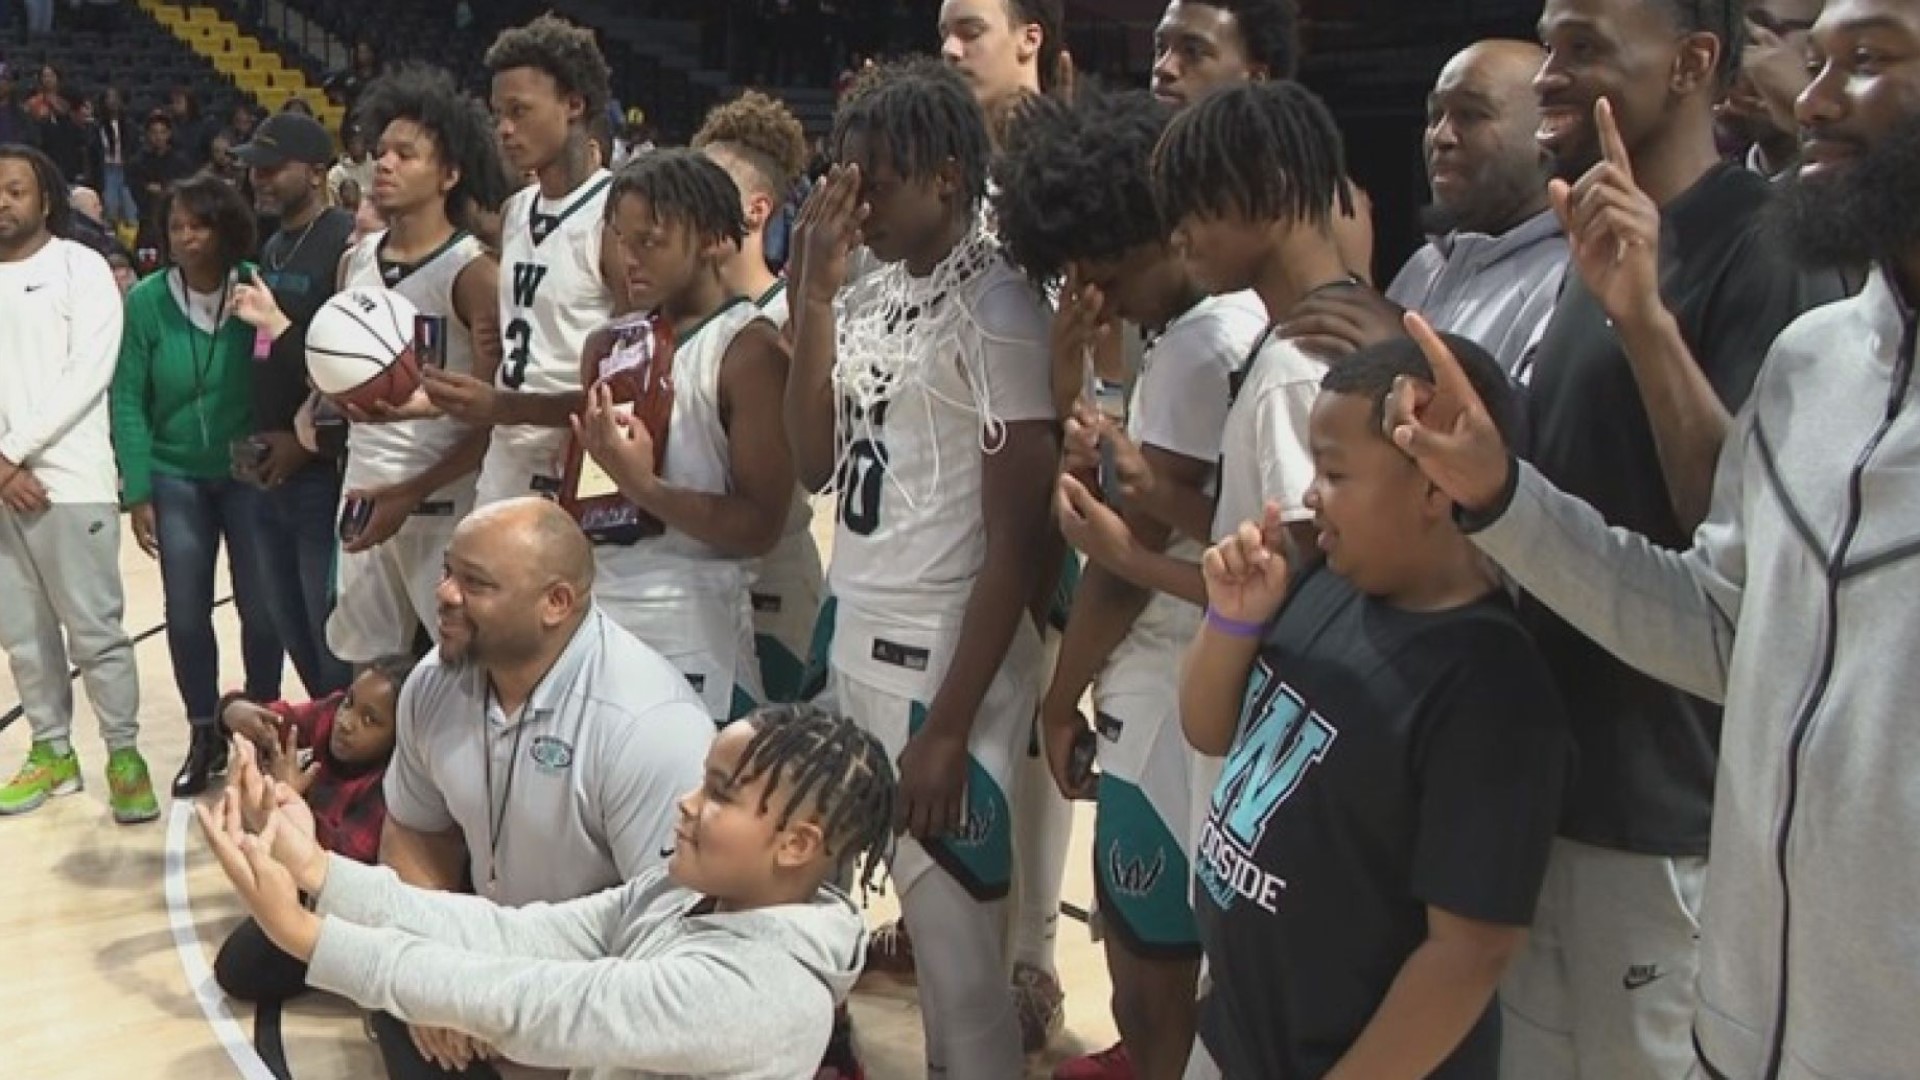 Woodside High School's state title has brought some joy to Newport News after a student shot and wounded a teacher at Richneck Elementary back in early January.